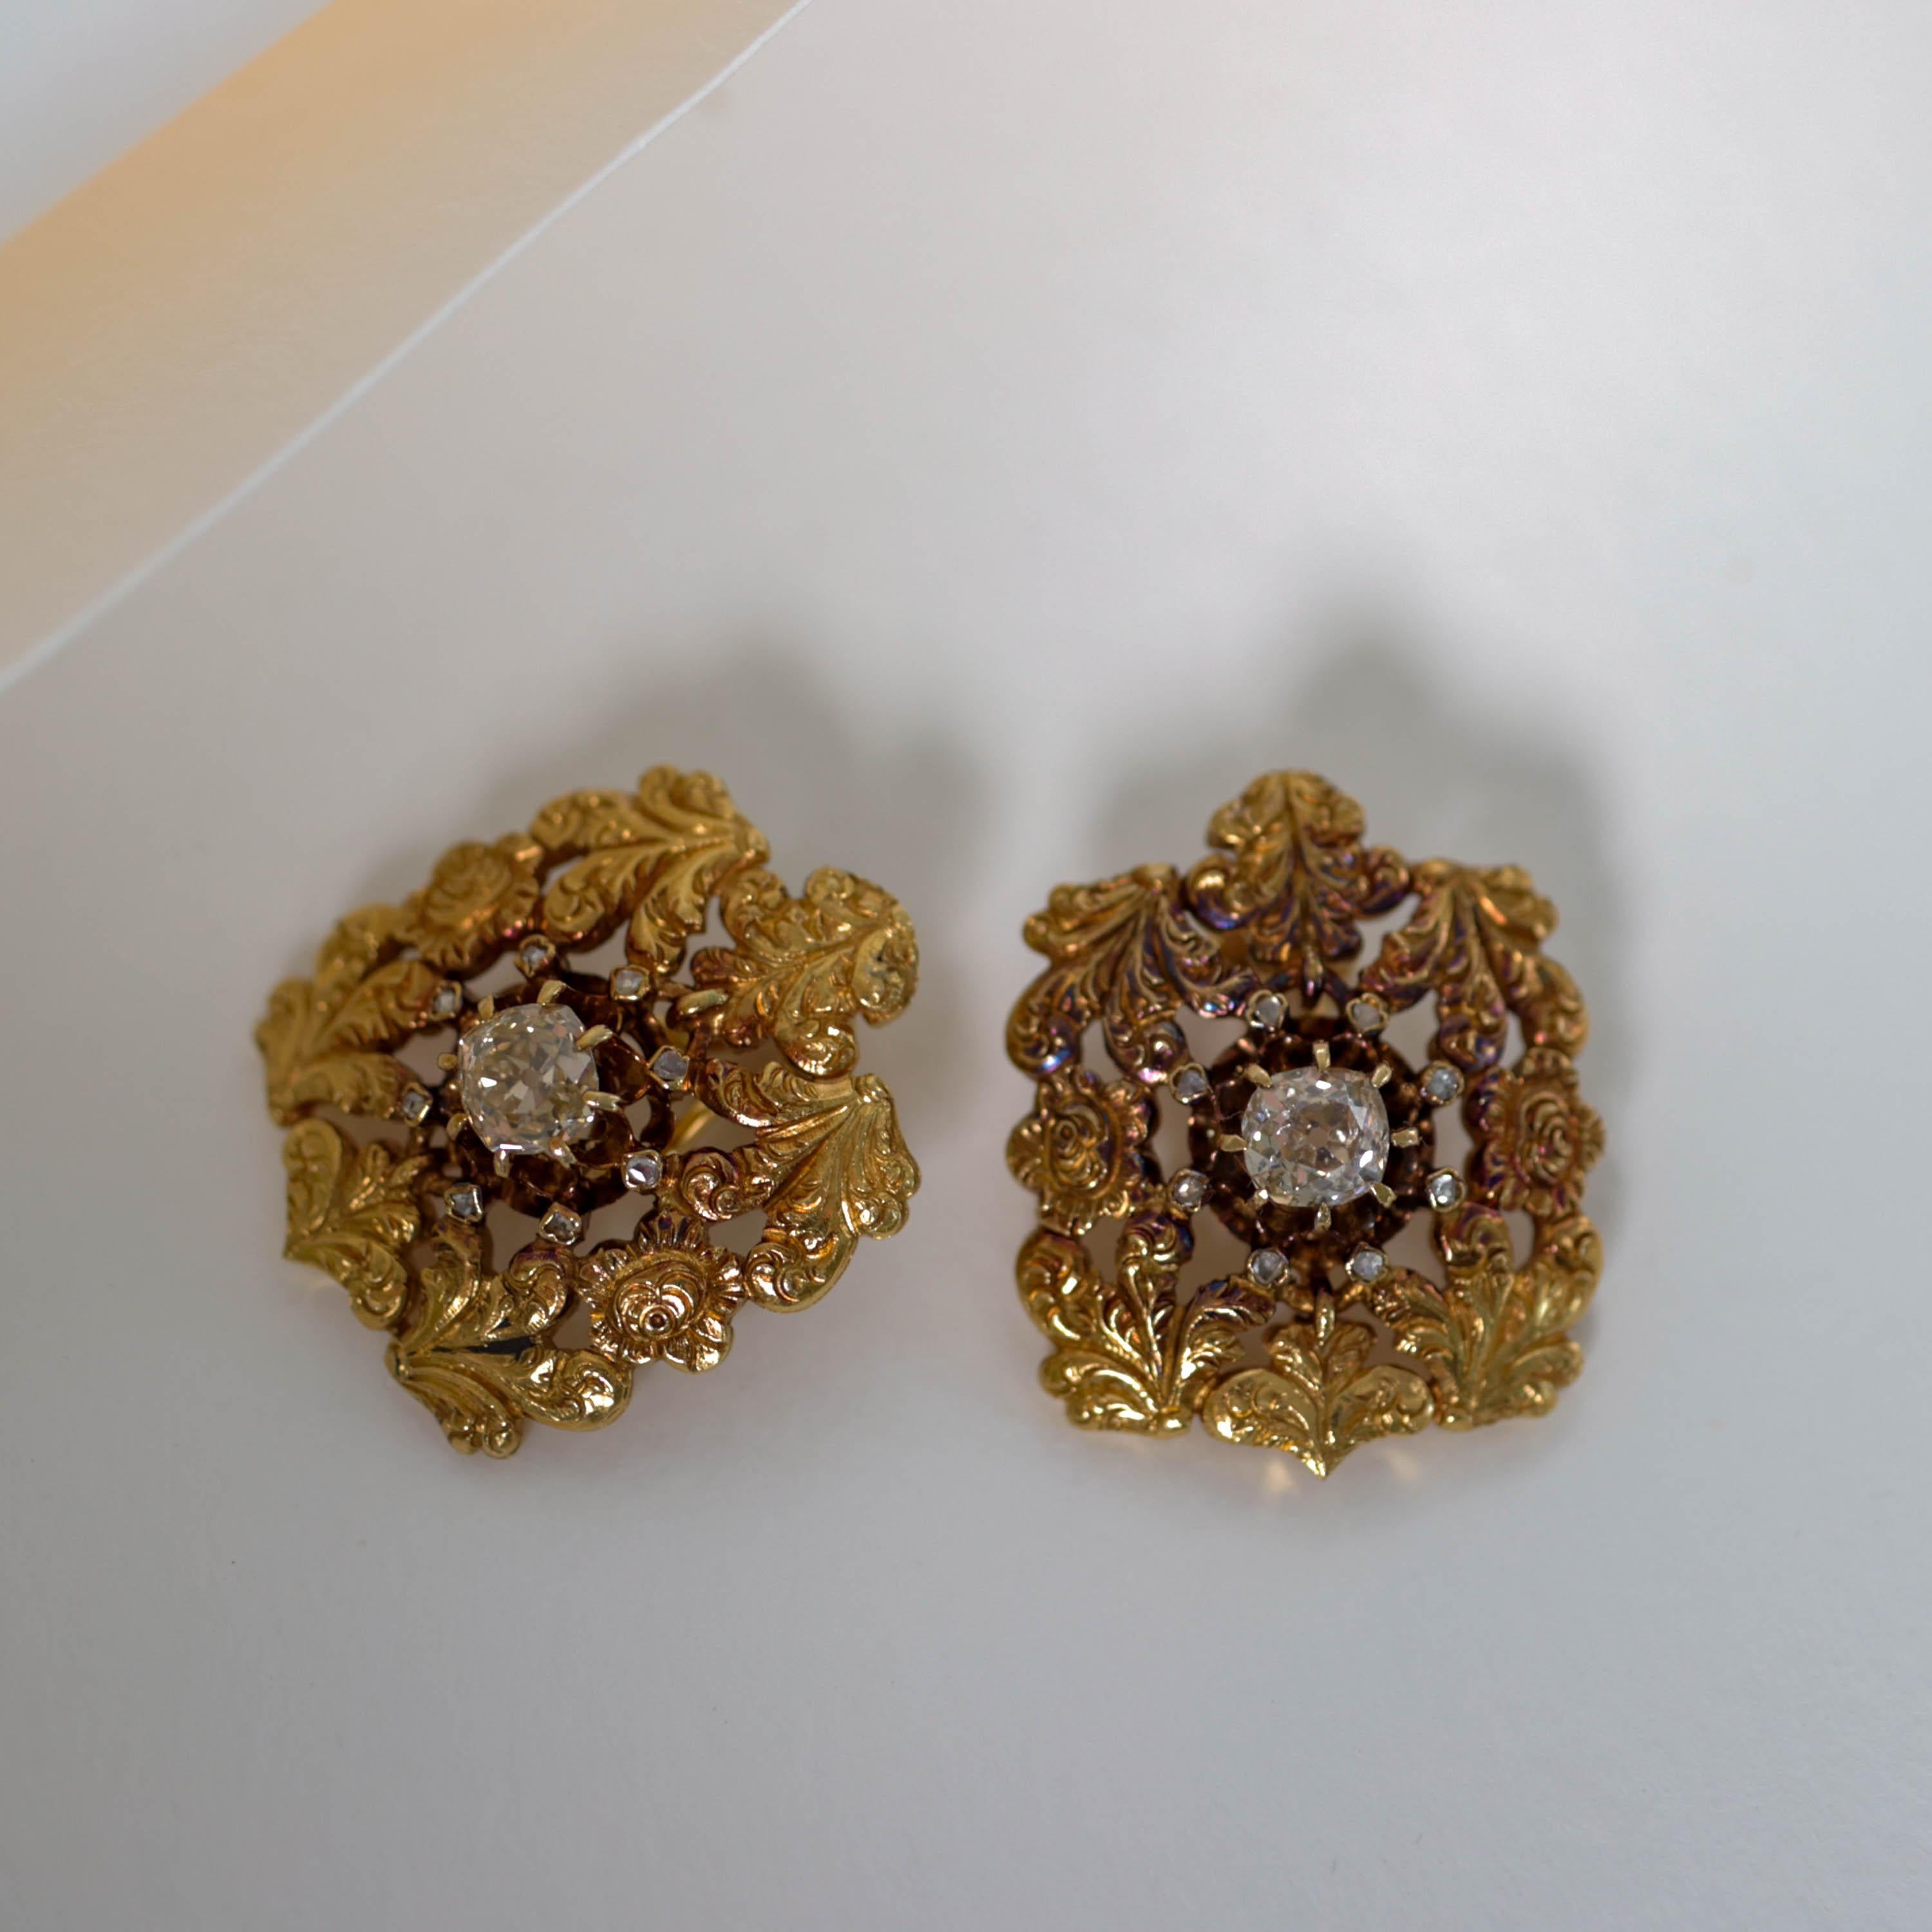 Women's Buccellati Suite Created by Mario Buccellati Himself, $450k Official Evaluation  For Sale